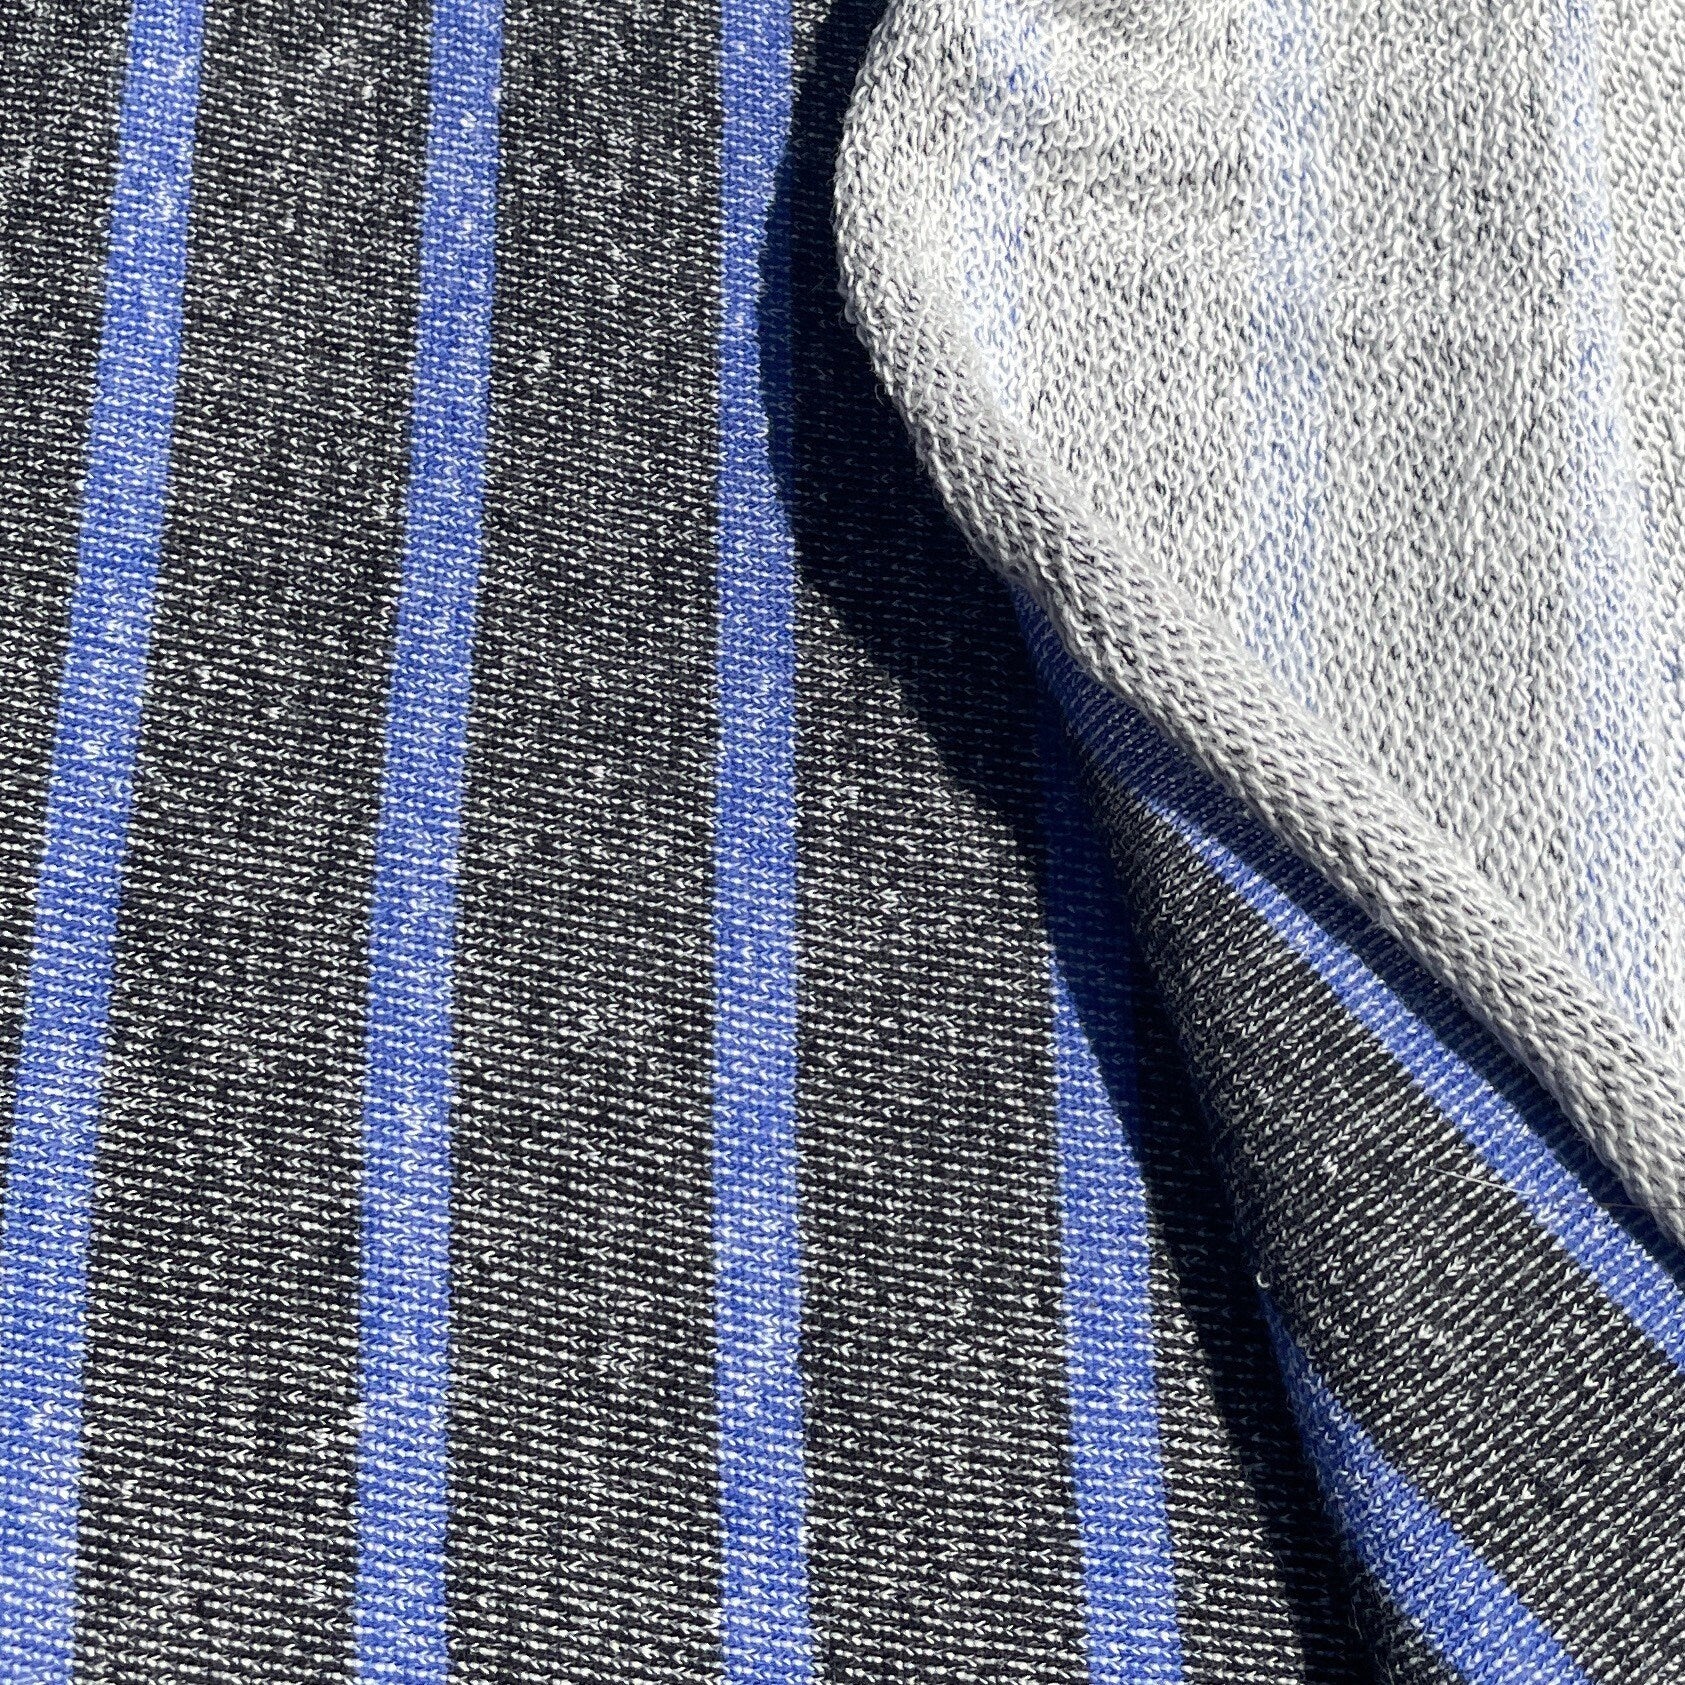 70 100% Cotton Striped French Terry Cloth White with Blue Stripes Yarn Dyed  Heavy Knit Fabric By the Yard